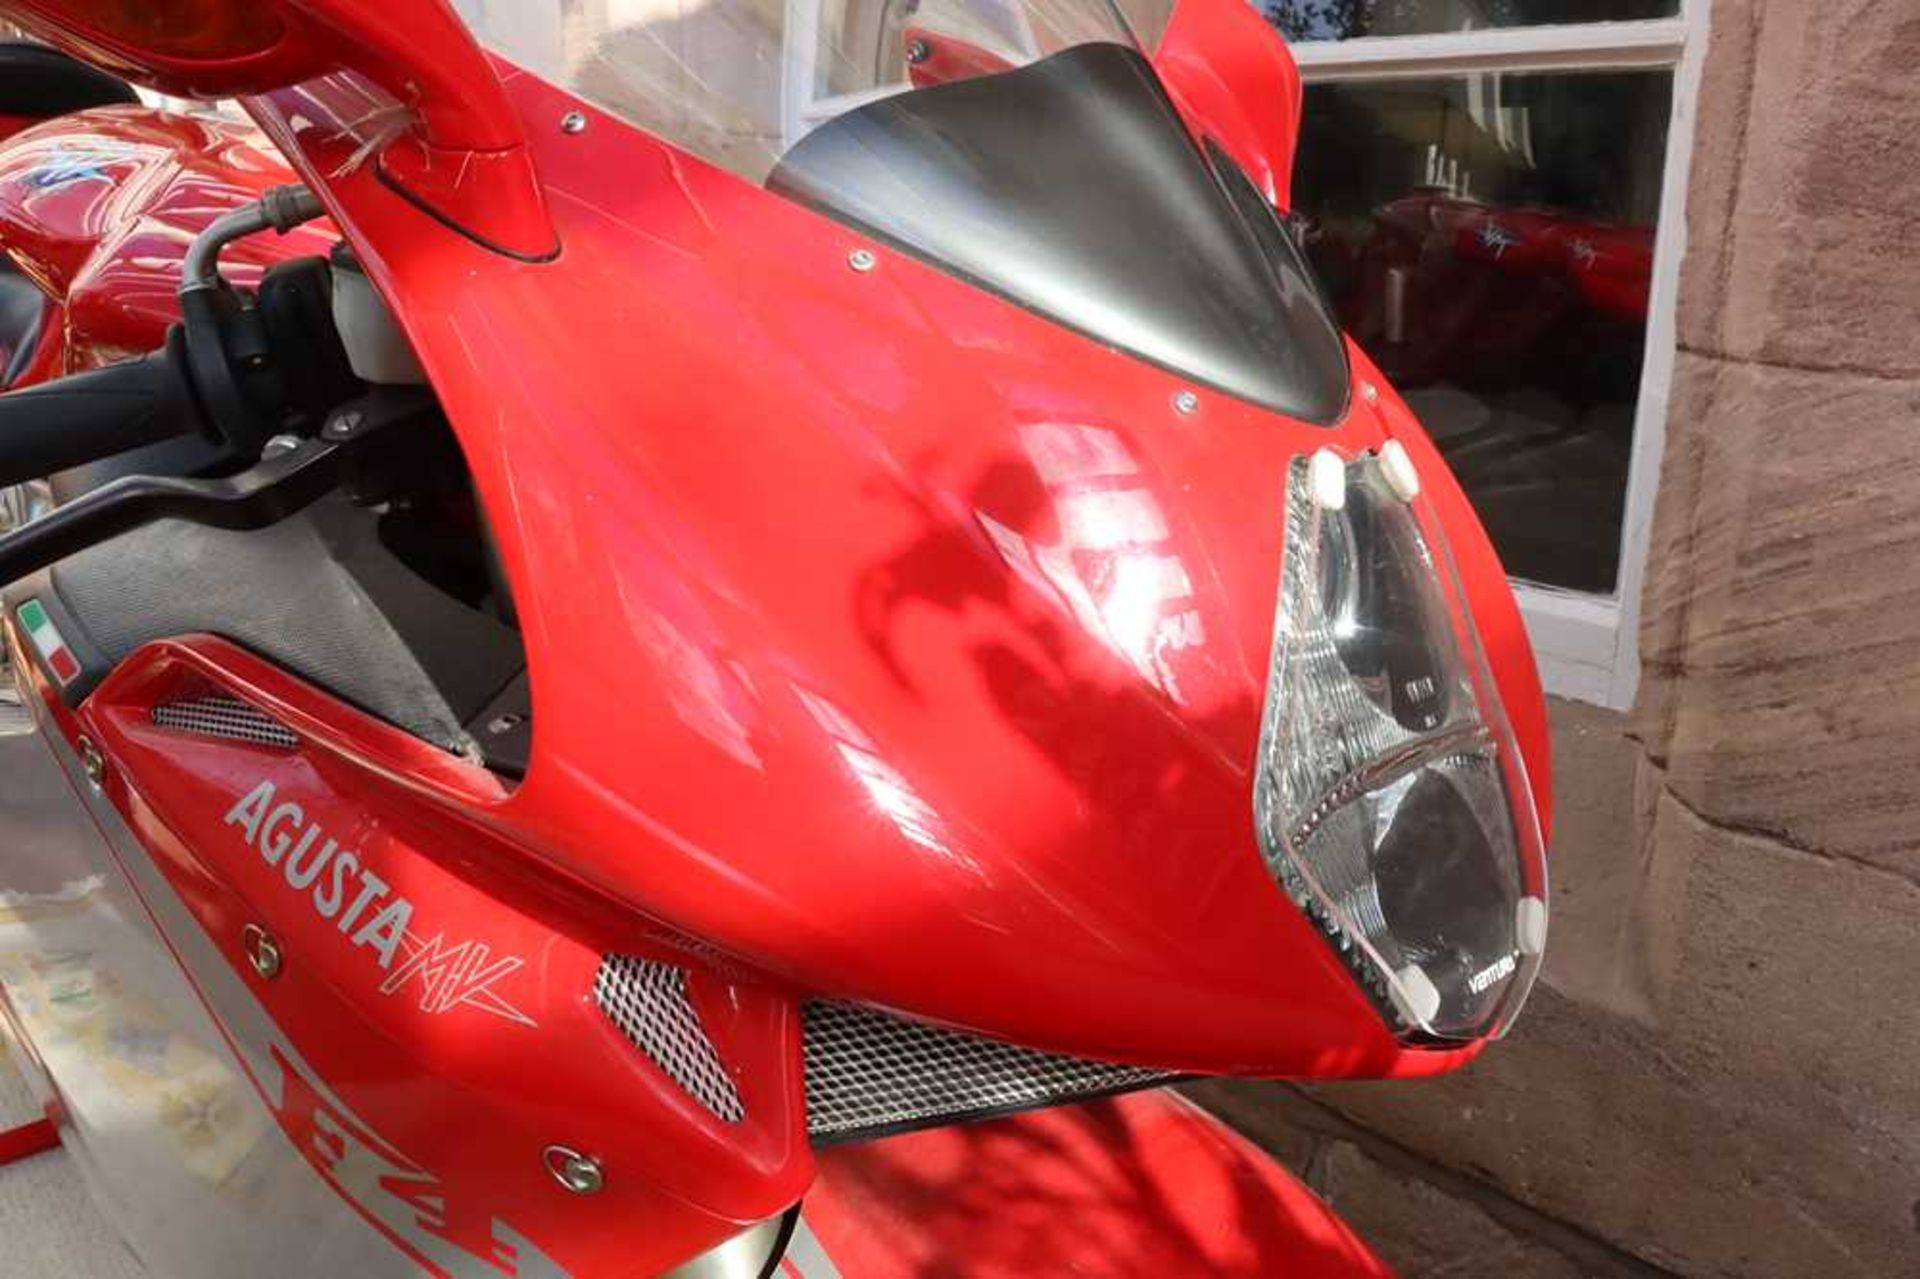 2007 MV Agusta F4 1000 R One owner from new - Image 8 of 41